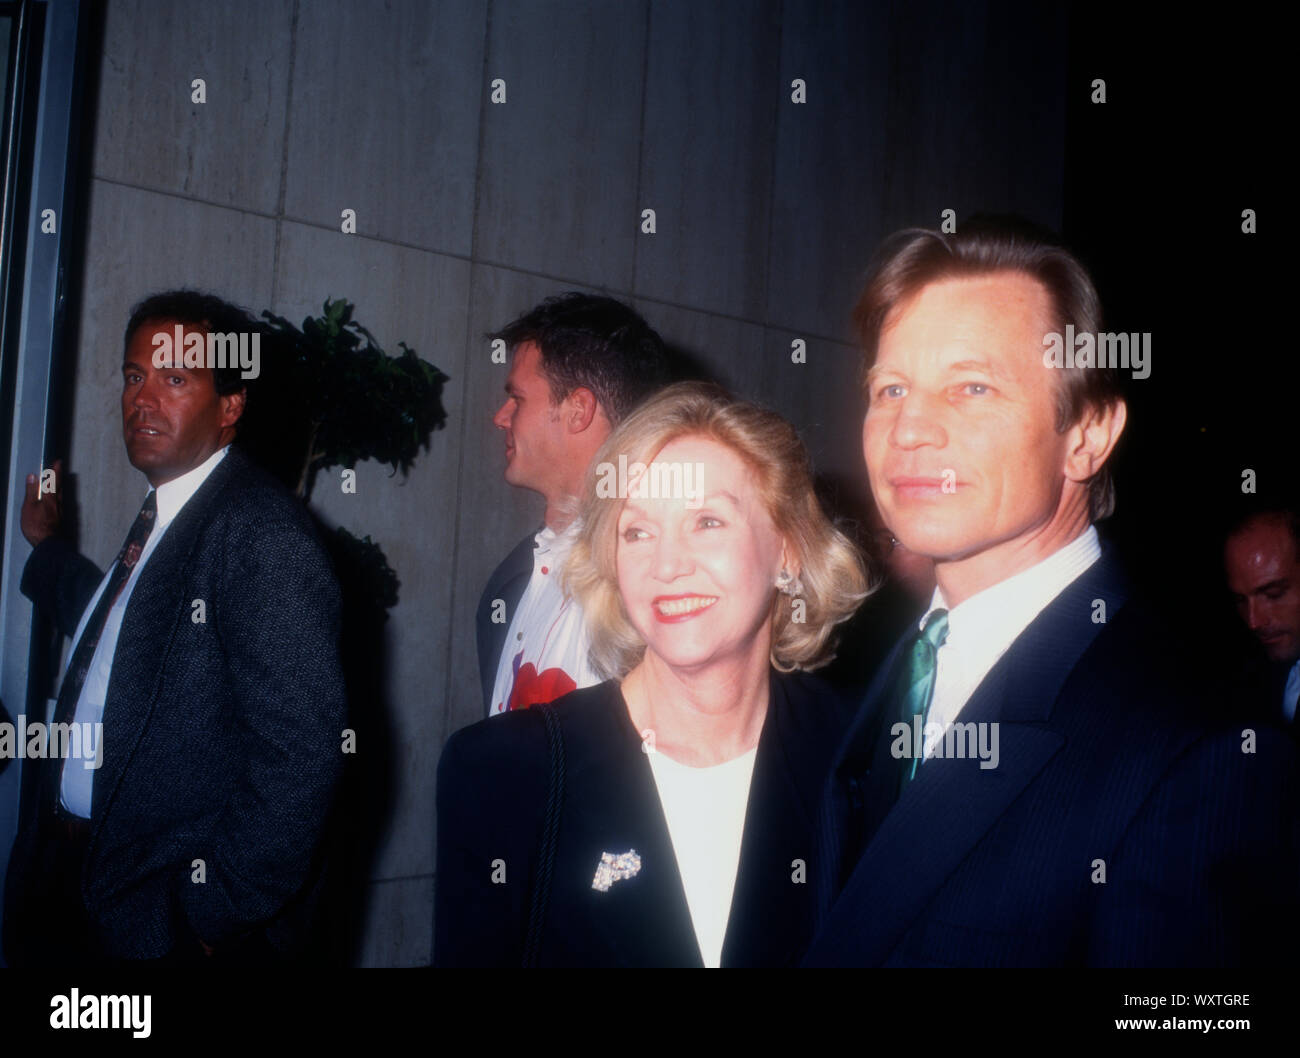 Westwood, California, USA 14th December 1994 Actor Michael York and wife Pat York attend the 'Ready To Wear' (Pret-a-Porter) Premiere on December 14, 1994 at the Avco Center Cinemas in Westwood, California, USA. Photo by Barry King/Alamy Stock Photo Stock Photo